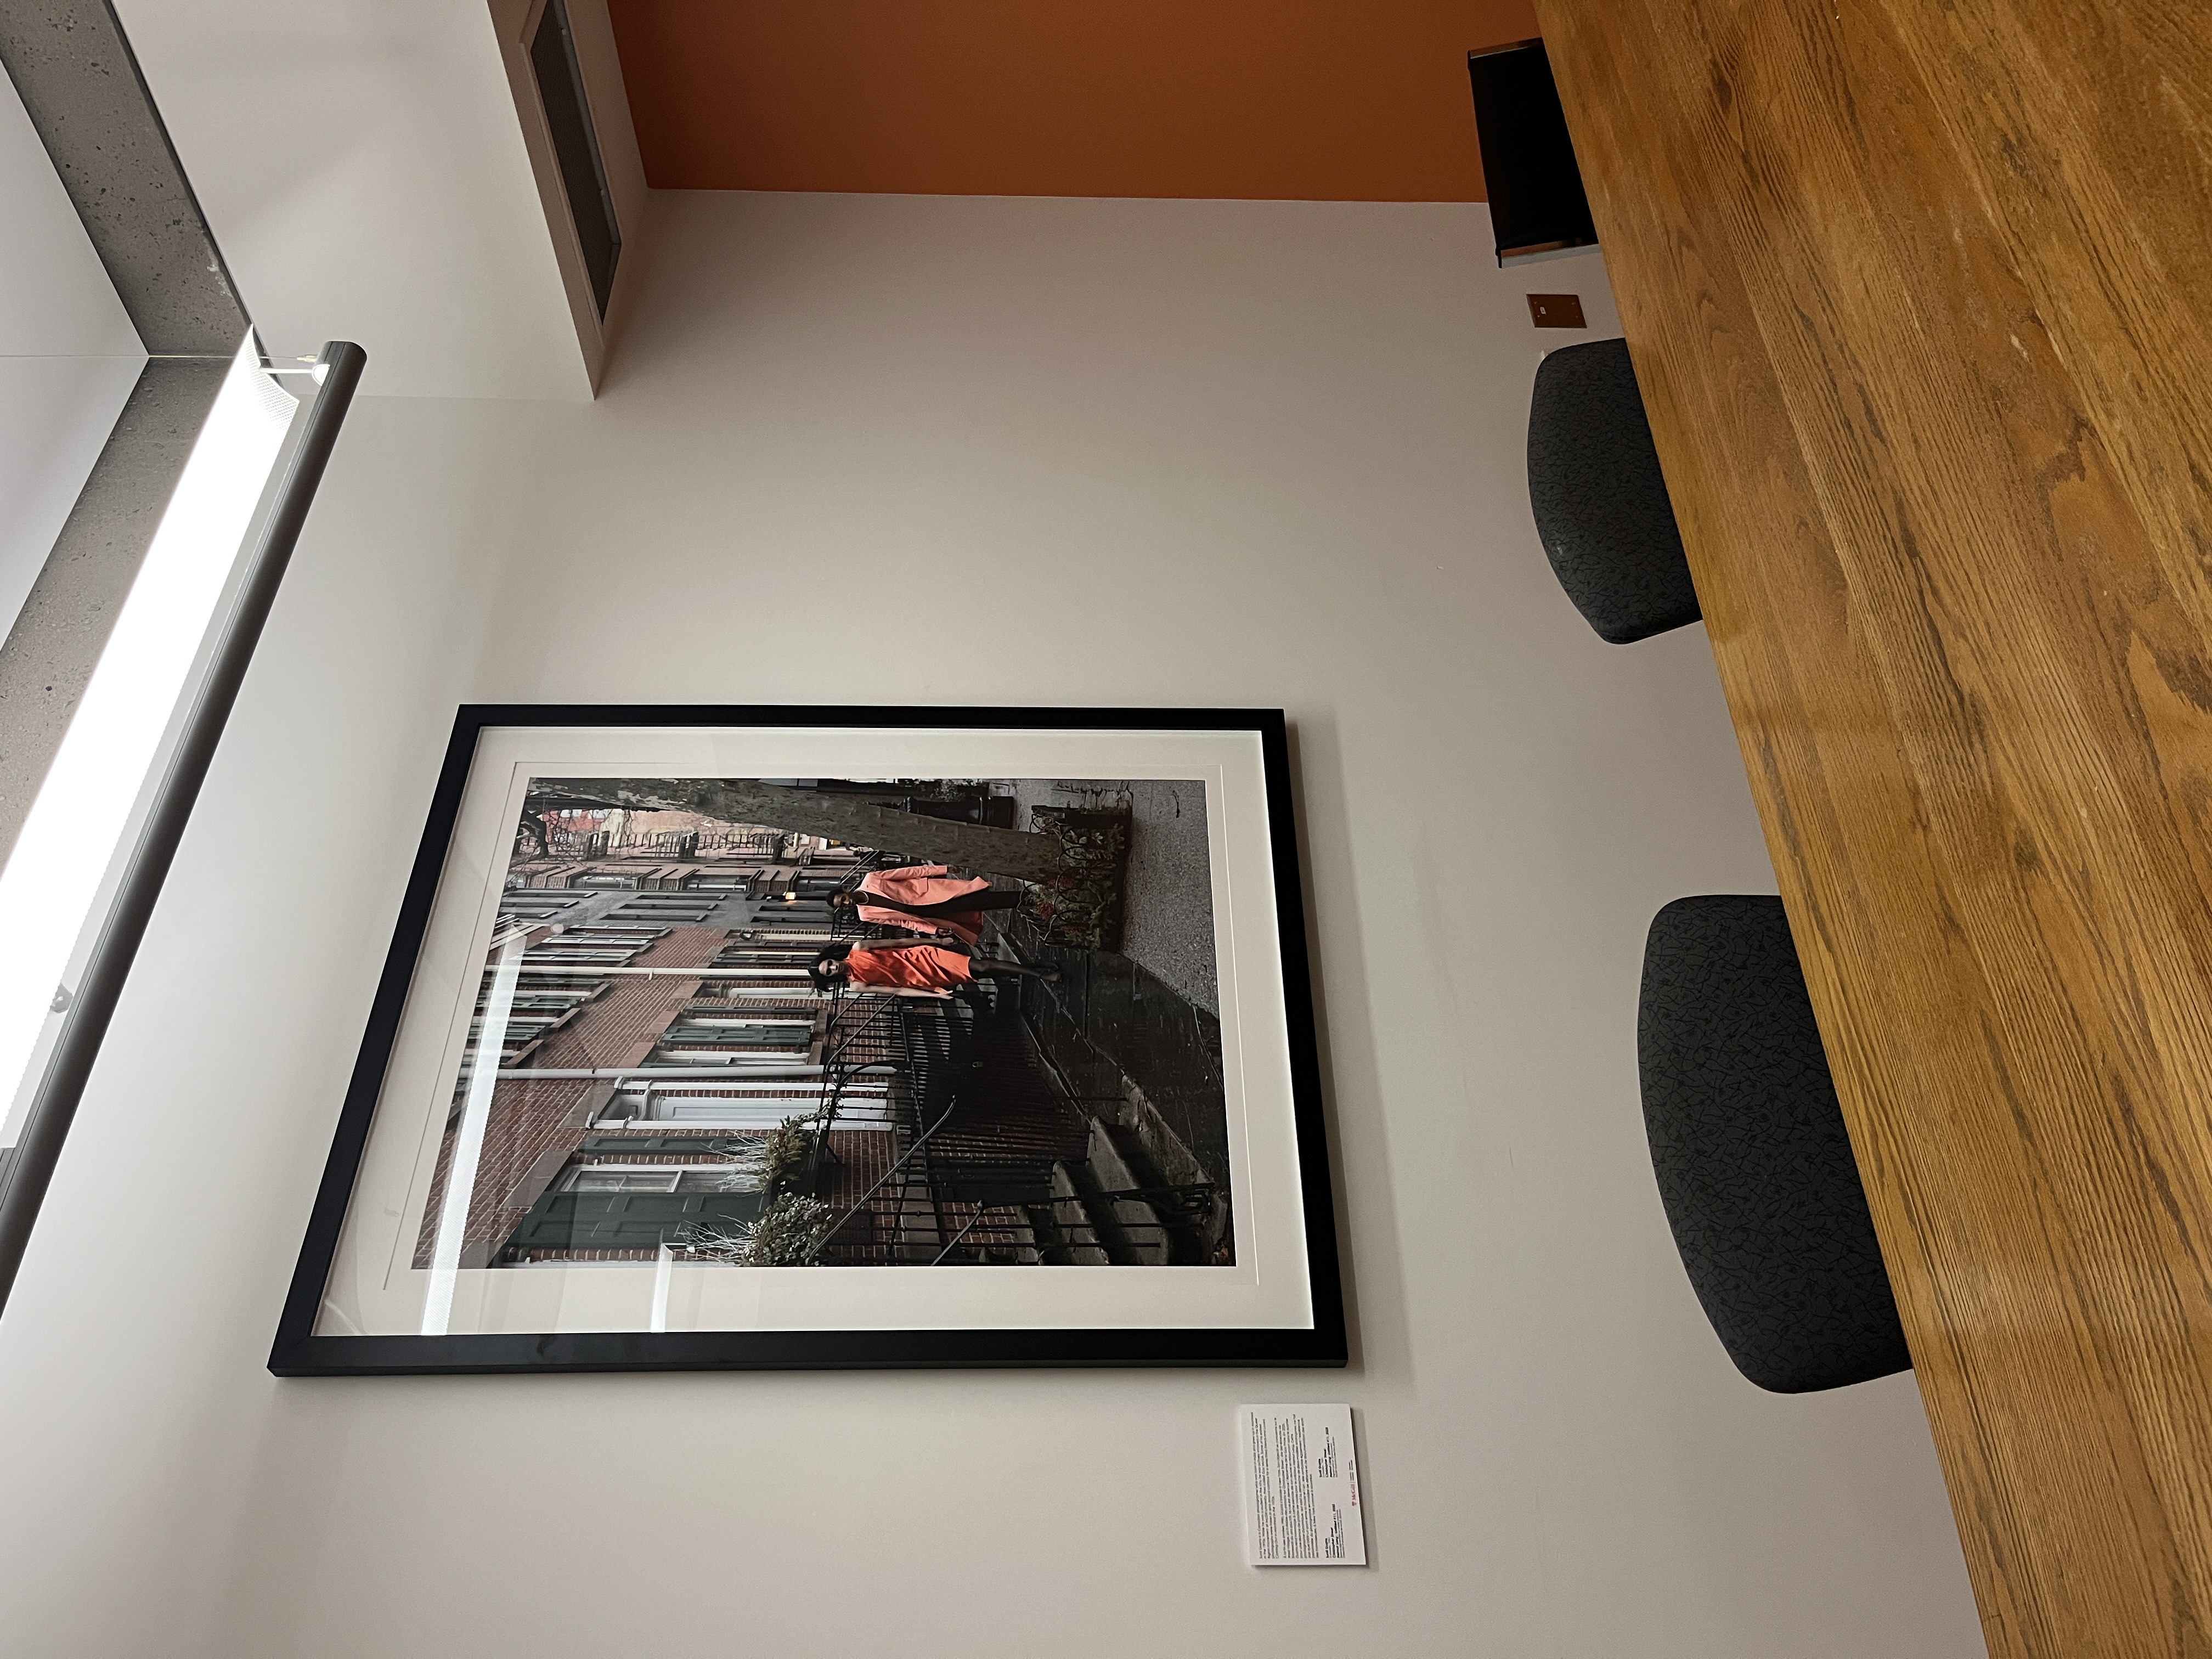 Large photograph installed on a wall